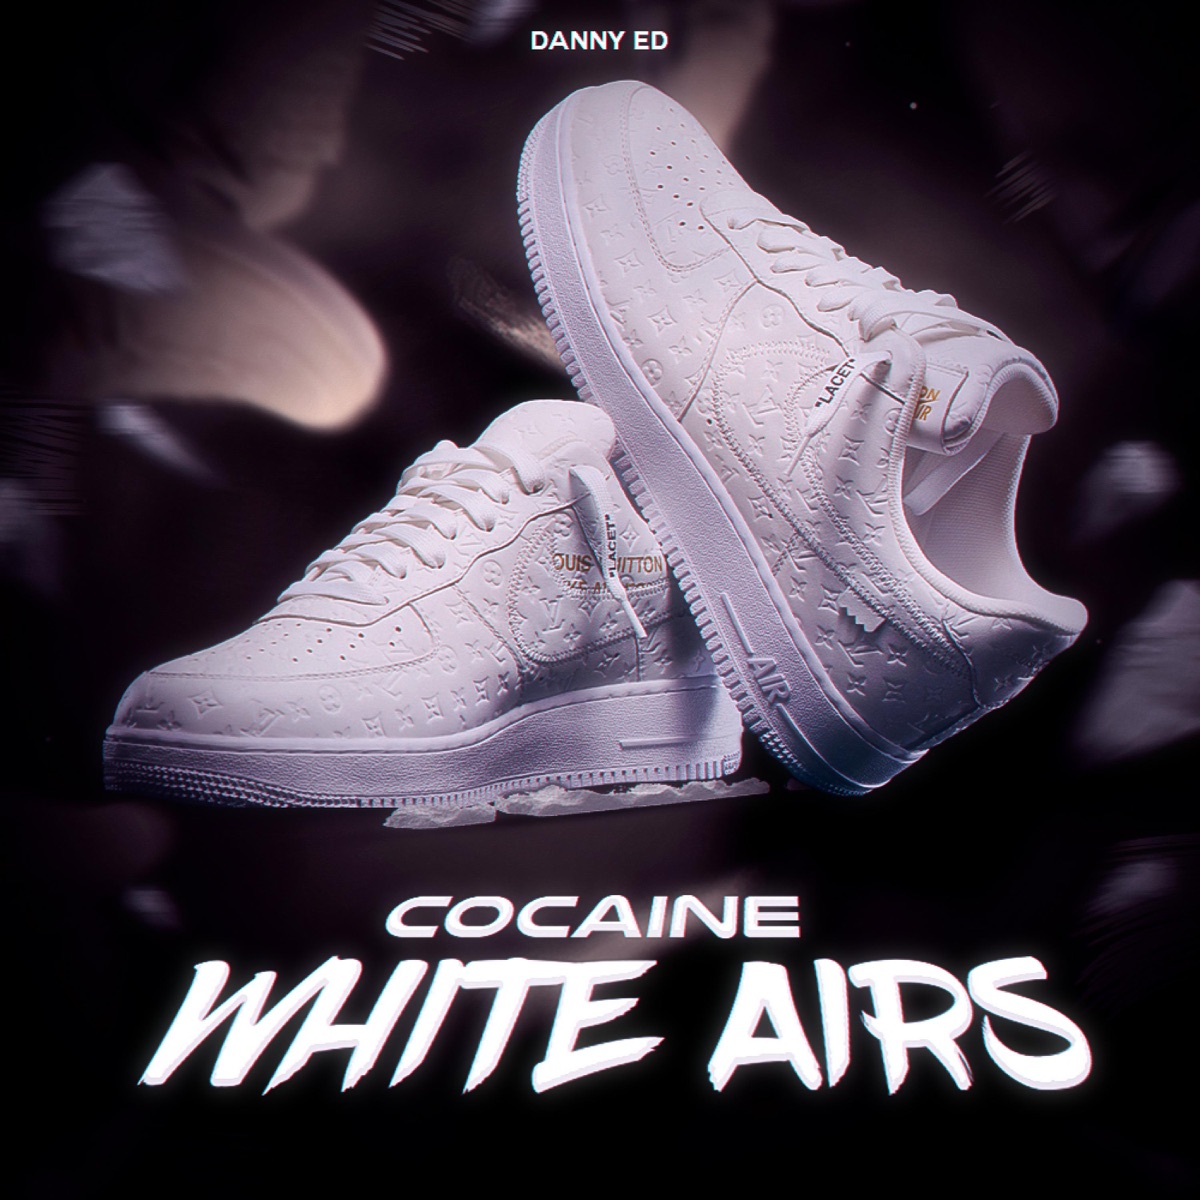 Cocaine White Airs - Single - Album by Danny Ed - Apple Music